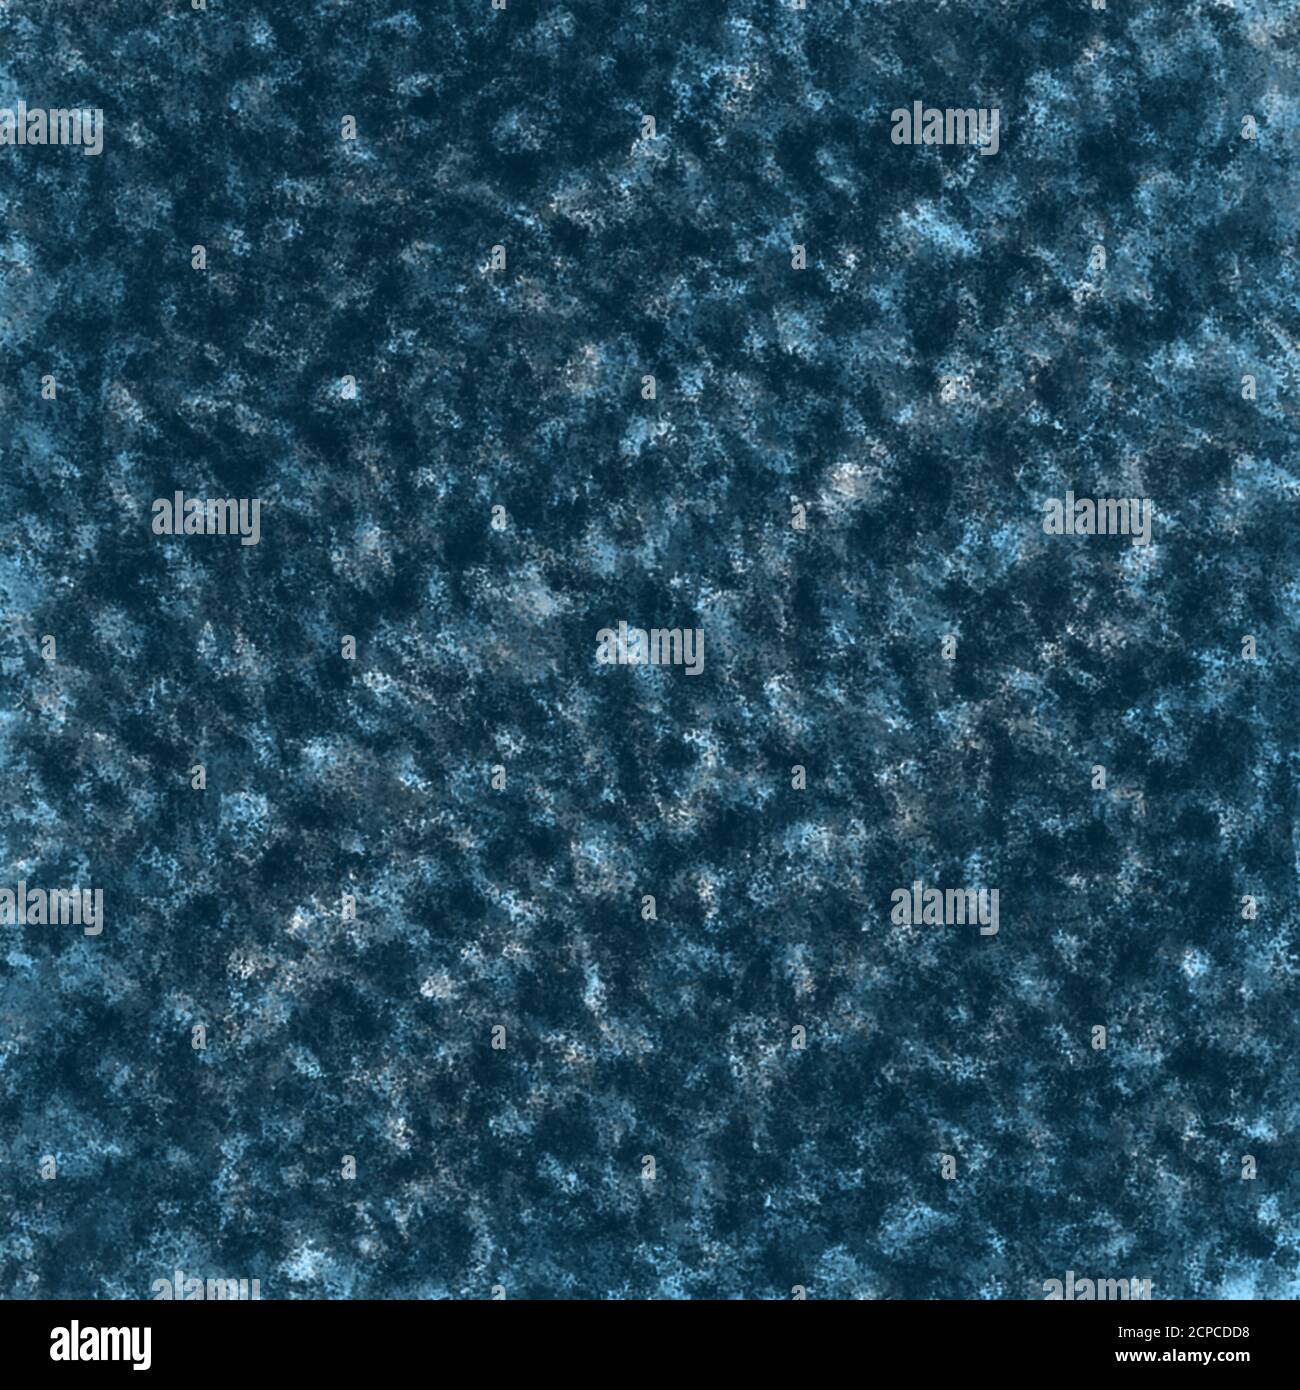 Blue, black, white and dark blue textured pattern. Vector stock. Stock Vector